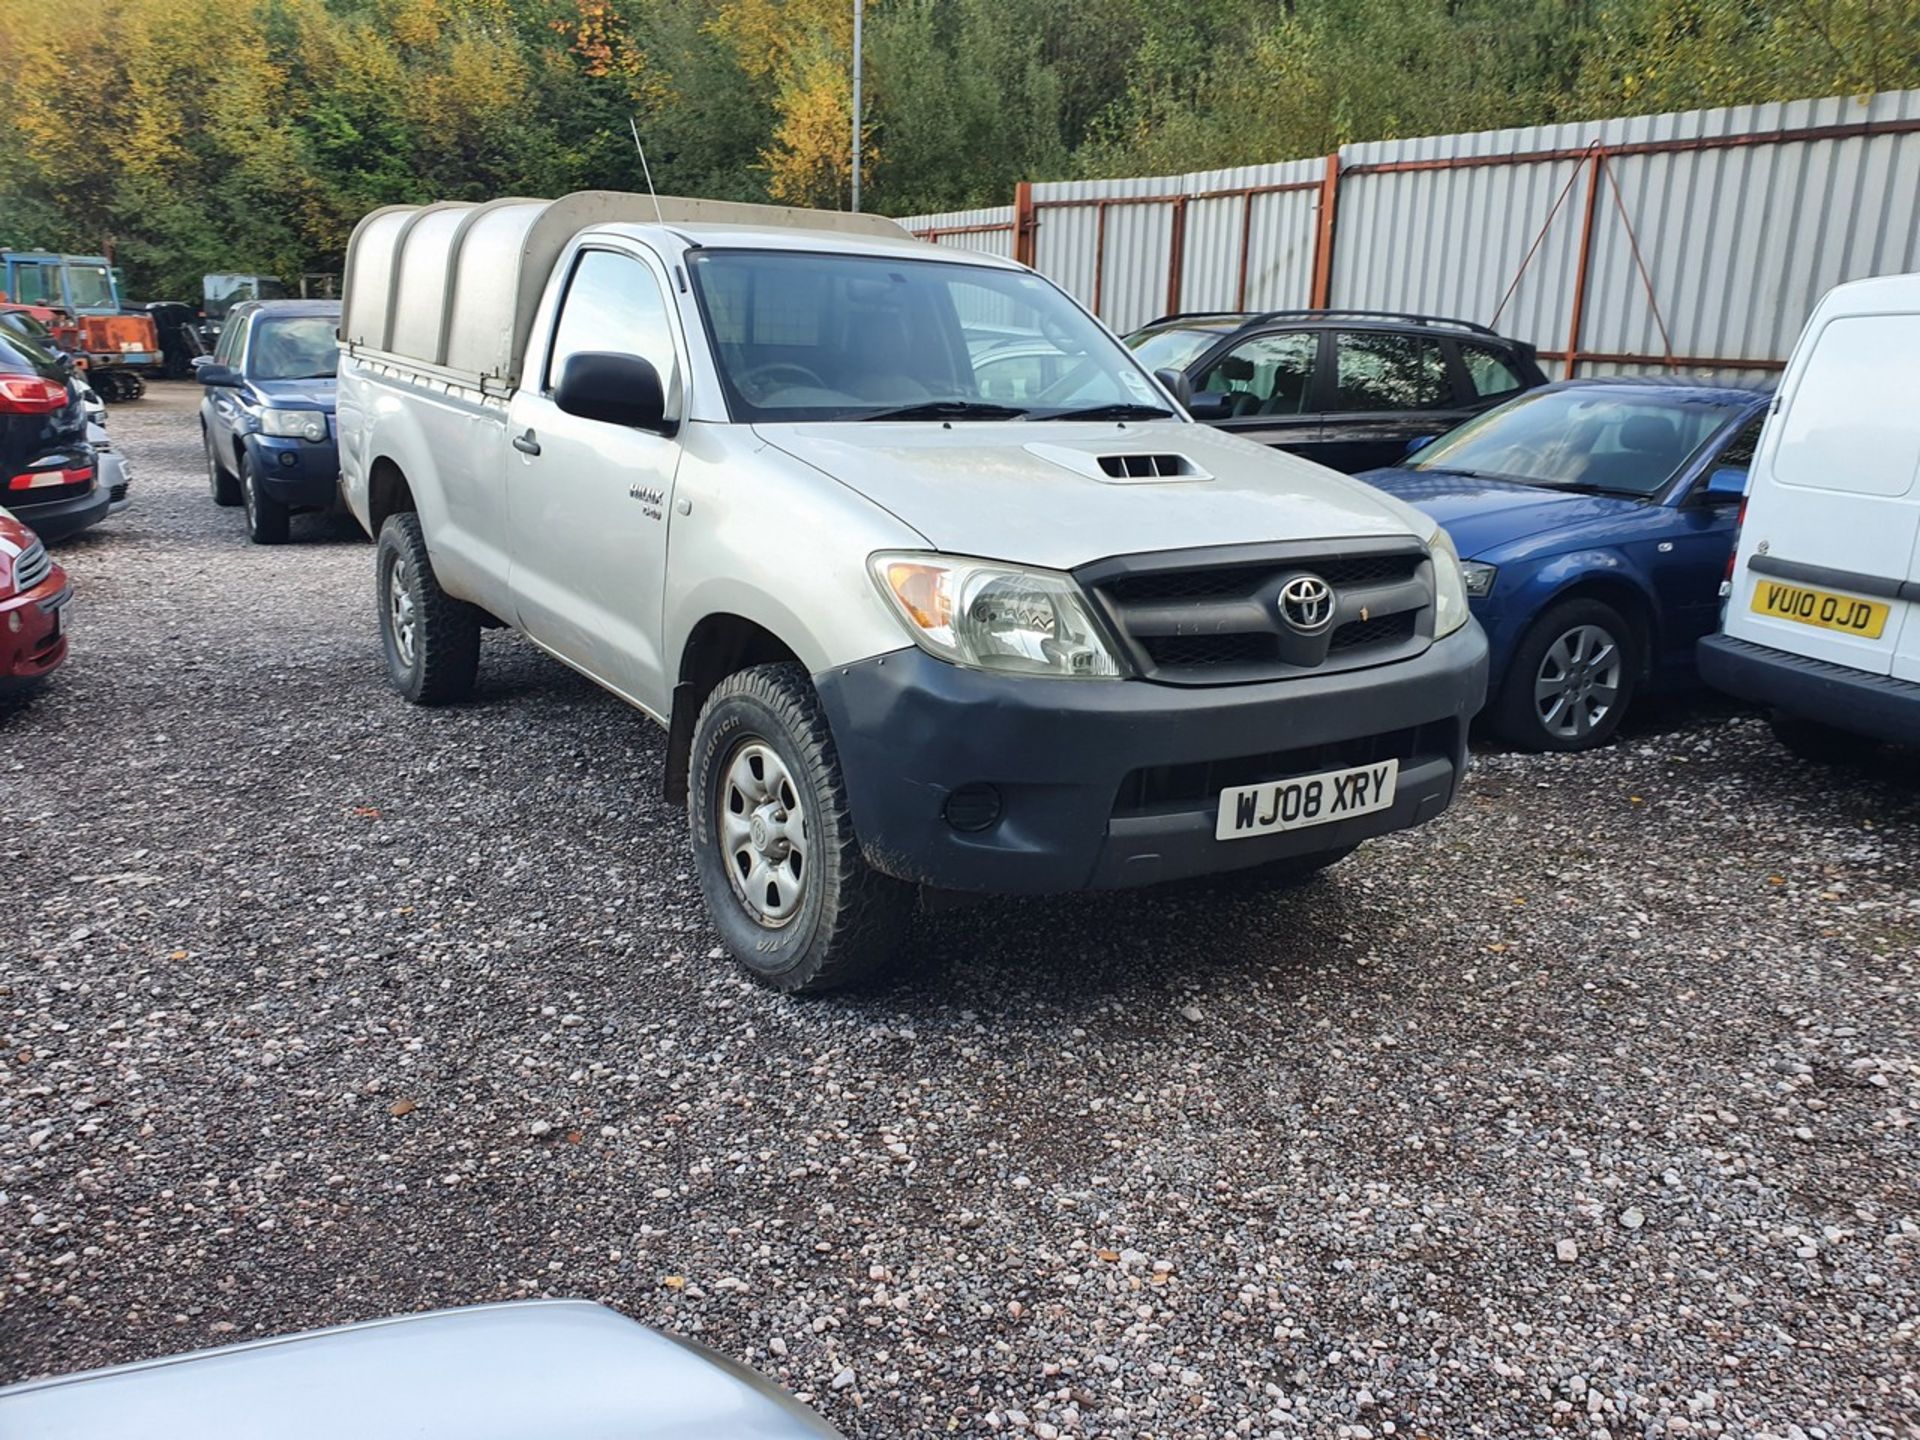 08/08 TOYOTA HILUX HL2 D-4D 4X4 S/C - 2494cc 2dr 4x4 (Silver, 78k) - Image 5 of 32